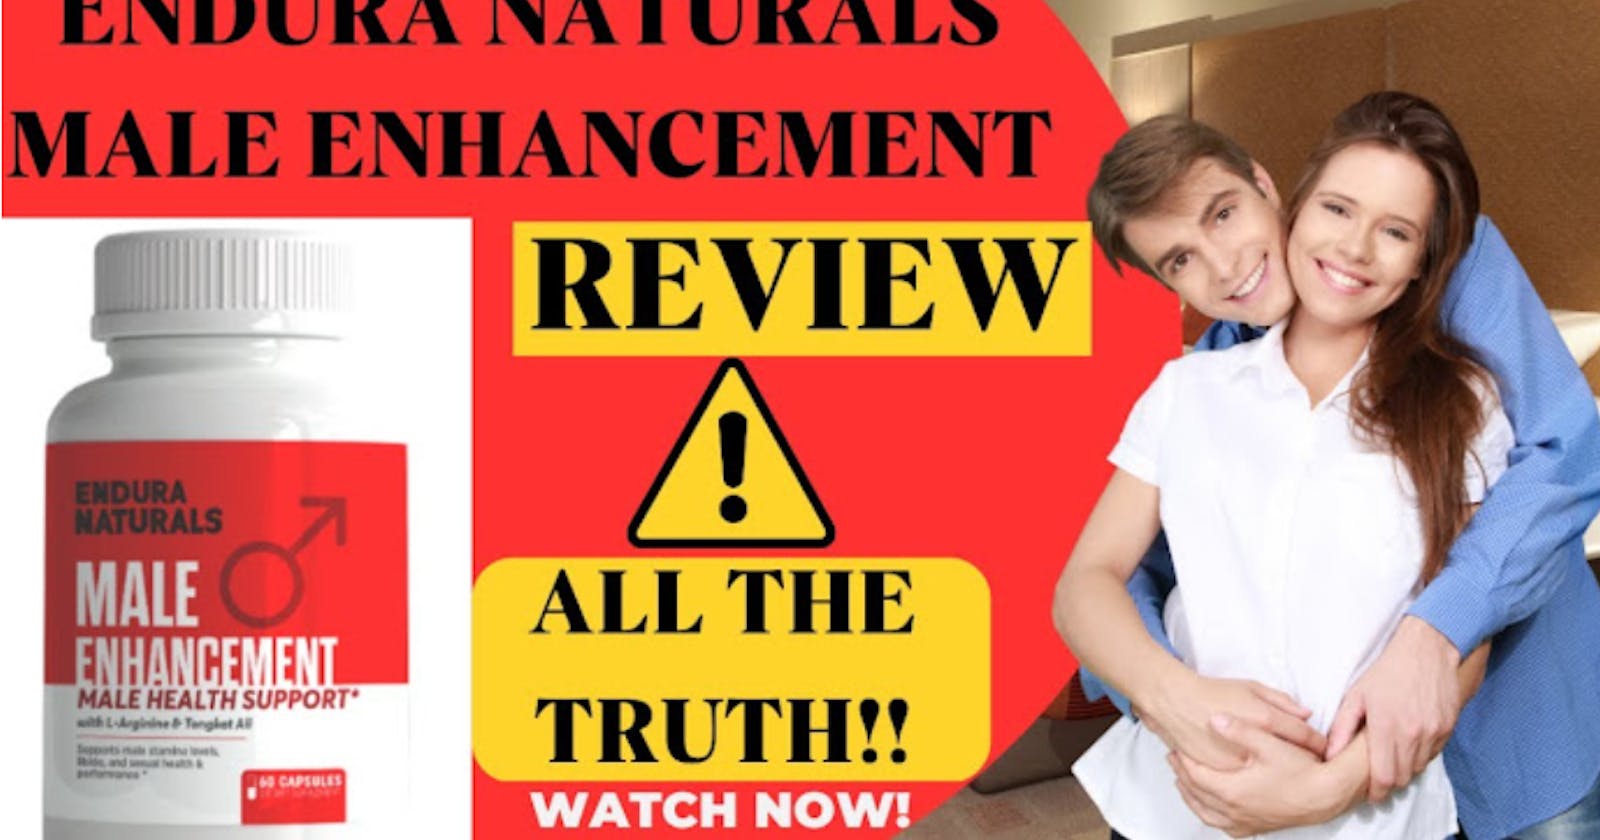 Endura Naturals Male Enhancement: Testosterone Booster That Works or a Waste of Money? 15 Days Results